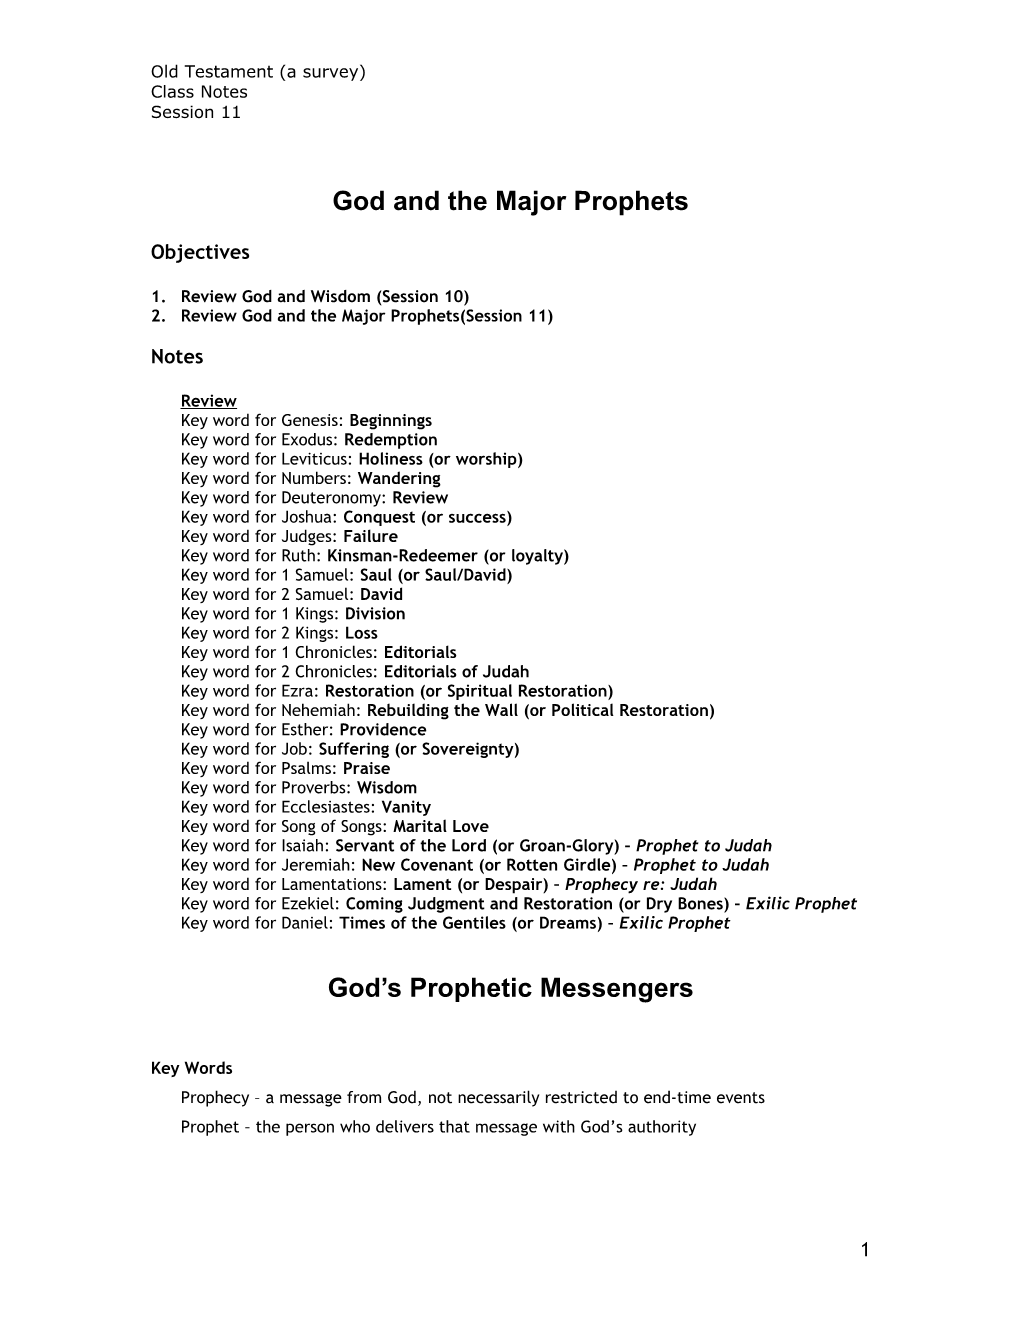 A Quick Overview of Old Testament History